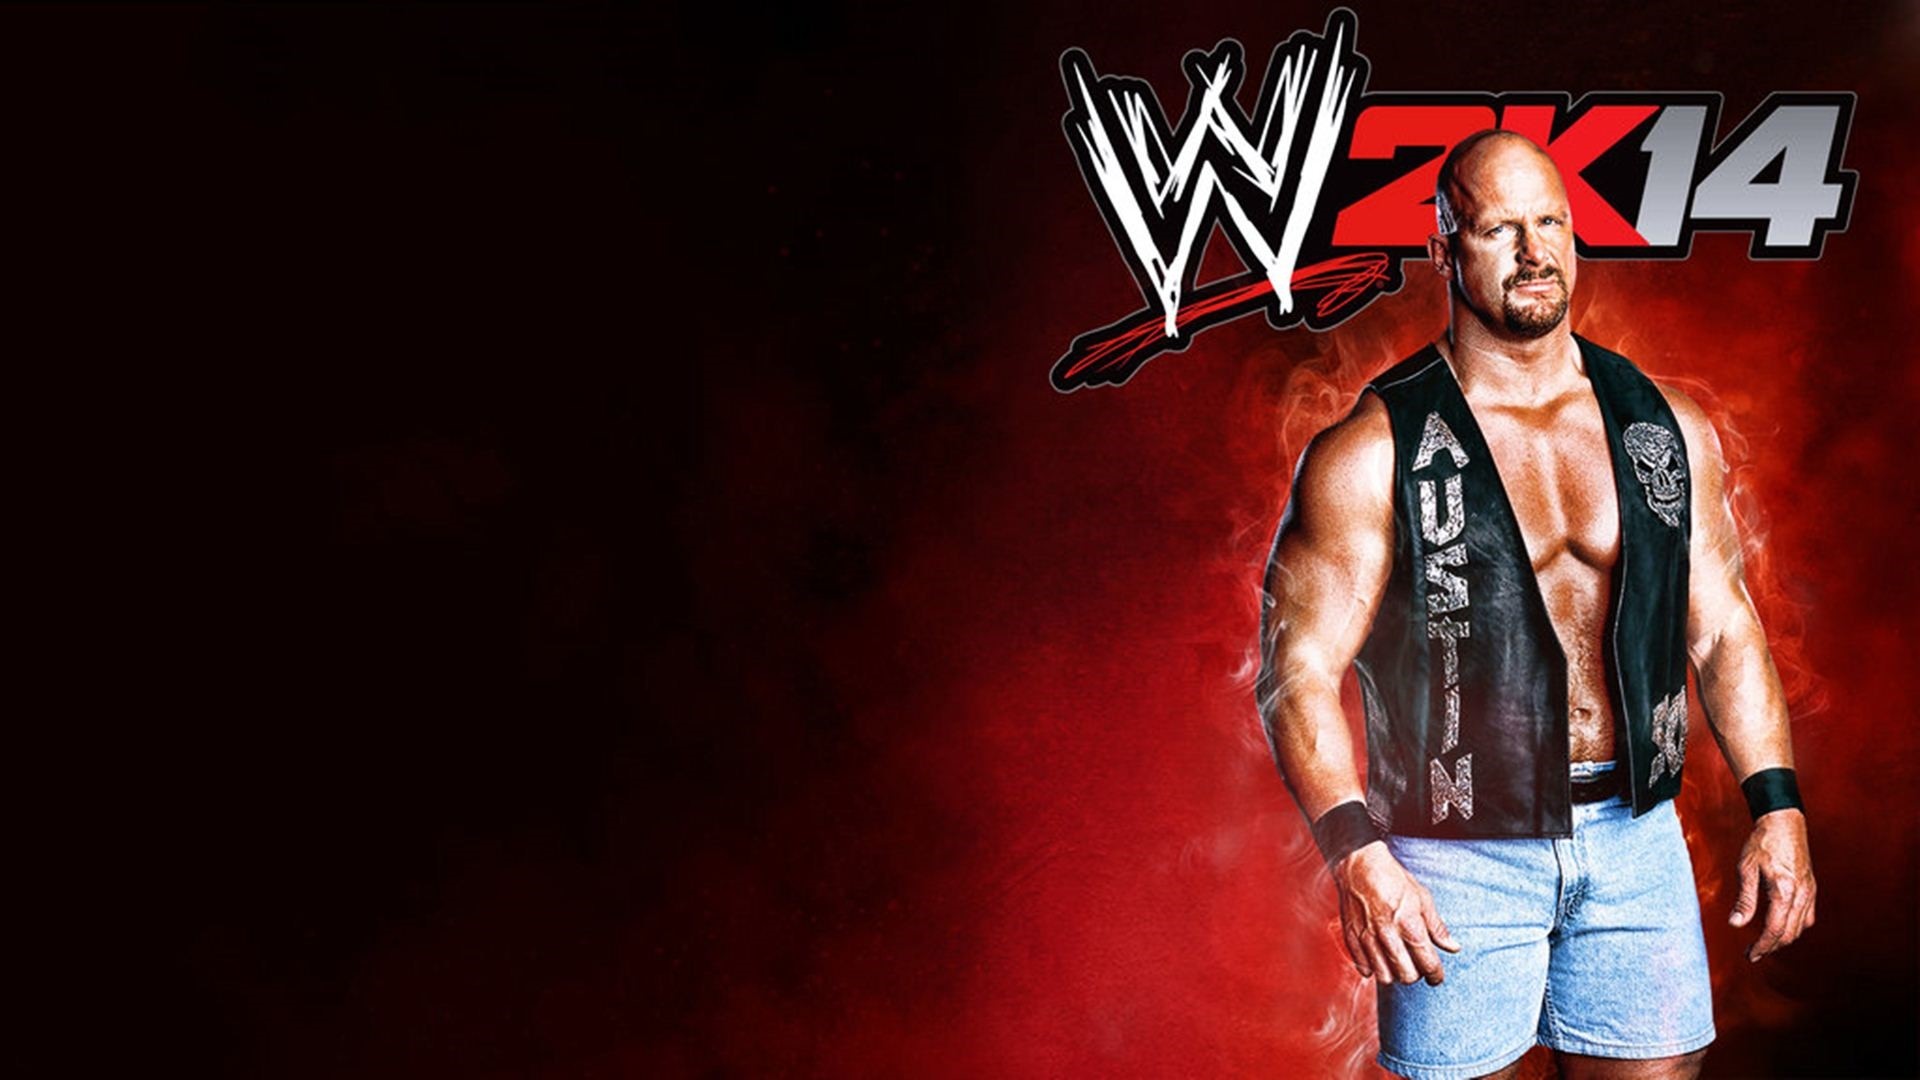 1920x1080 stone cold wwe hd background wallpaper